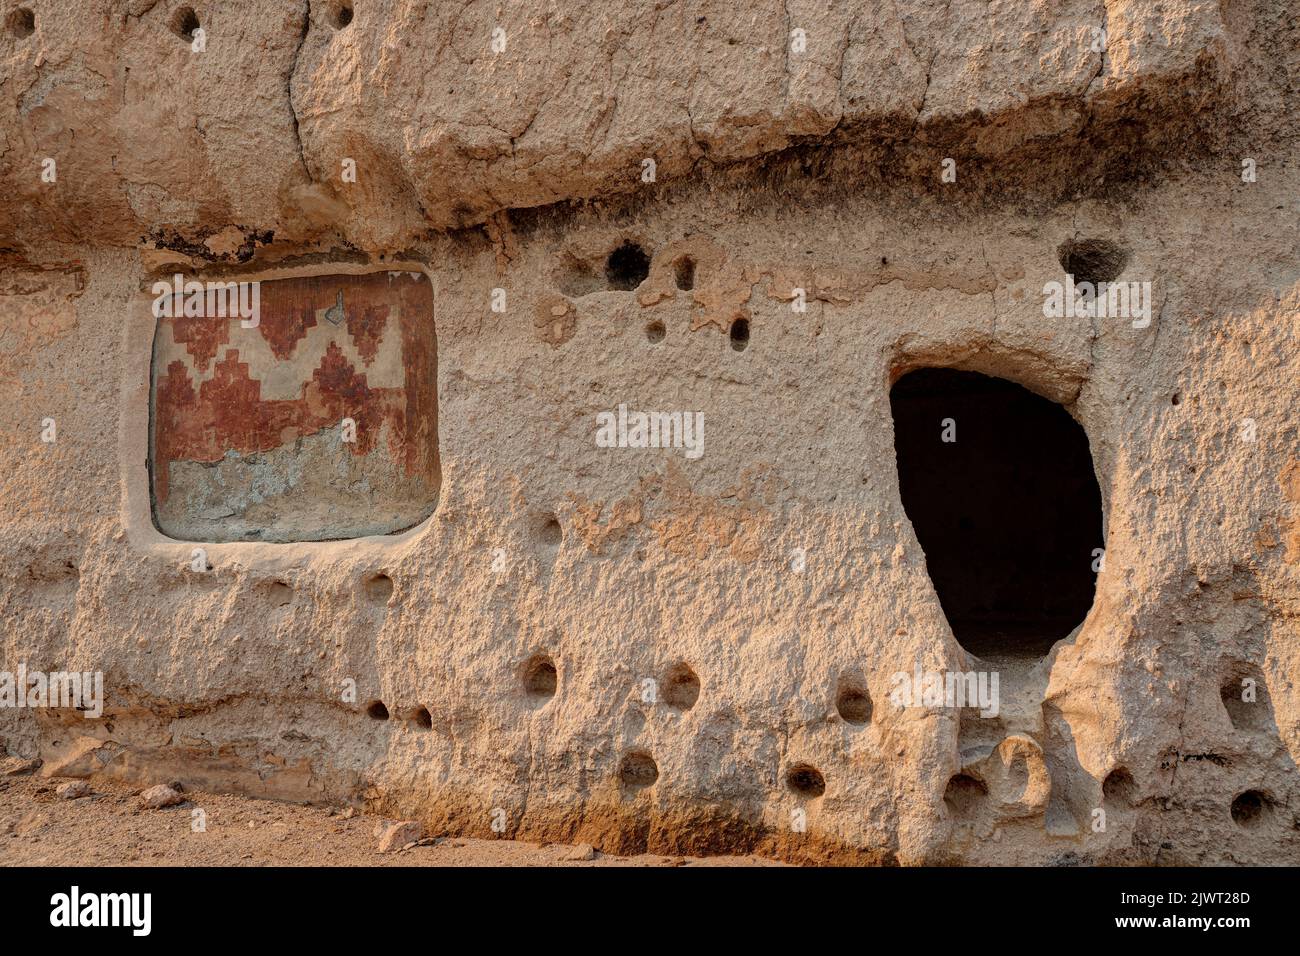 Petroglyph in Cliff Dwellings, Bandelier National Monument, New Mexico, USA Stock Photo